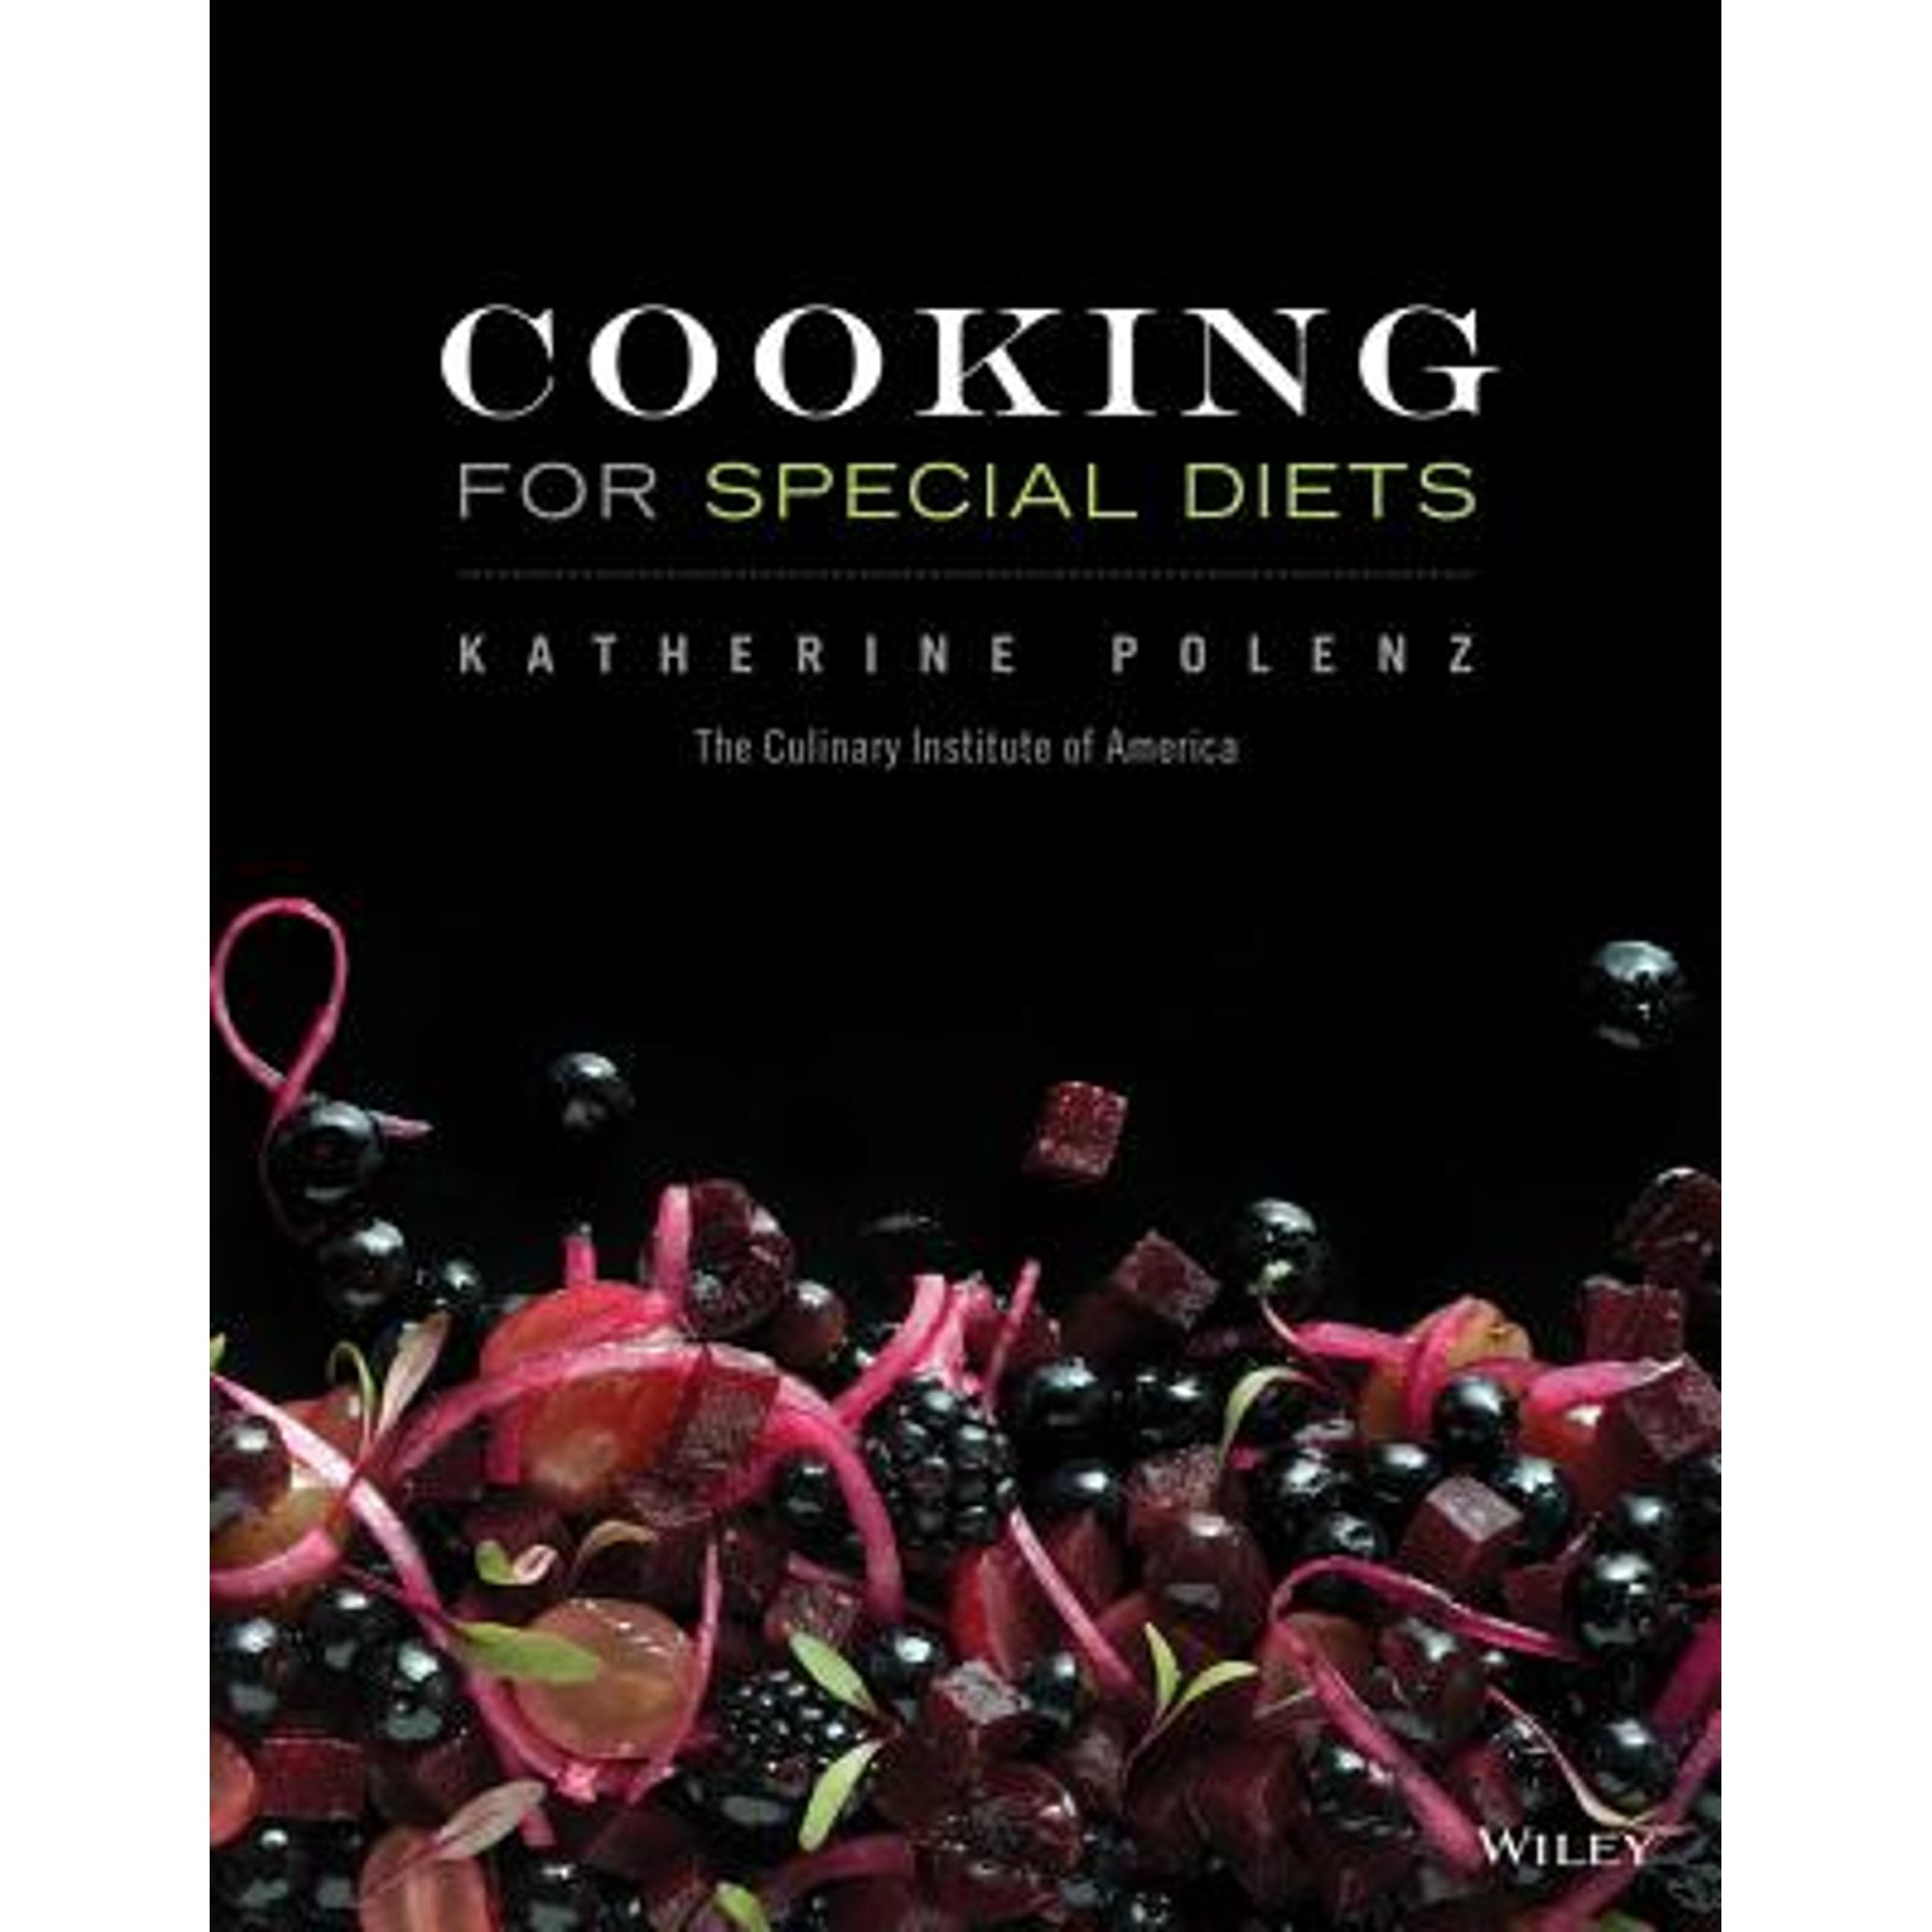 Pre-Owned Cooking for Special Diets (Hardcover 9781118137758) by Katherine Polenz, The Culinary Institute of America (Cia)